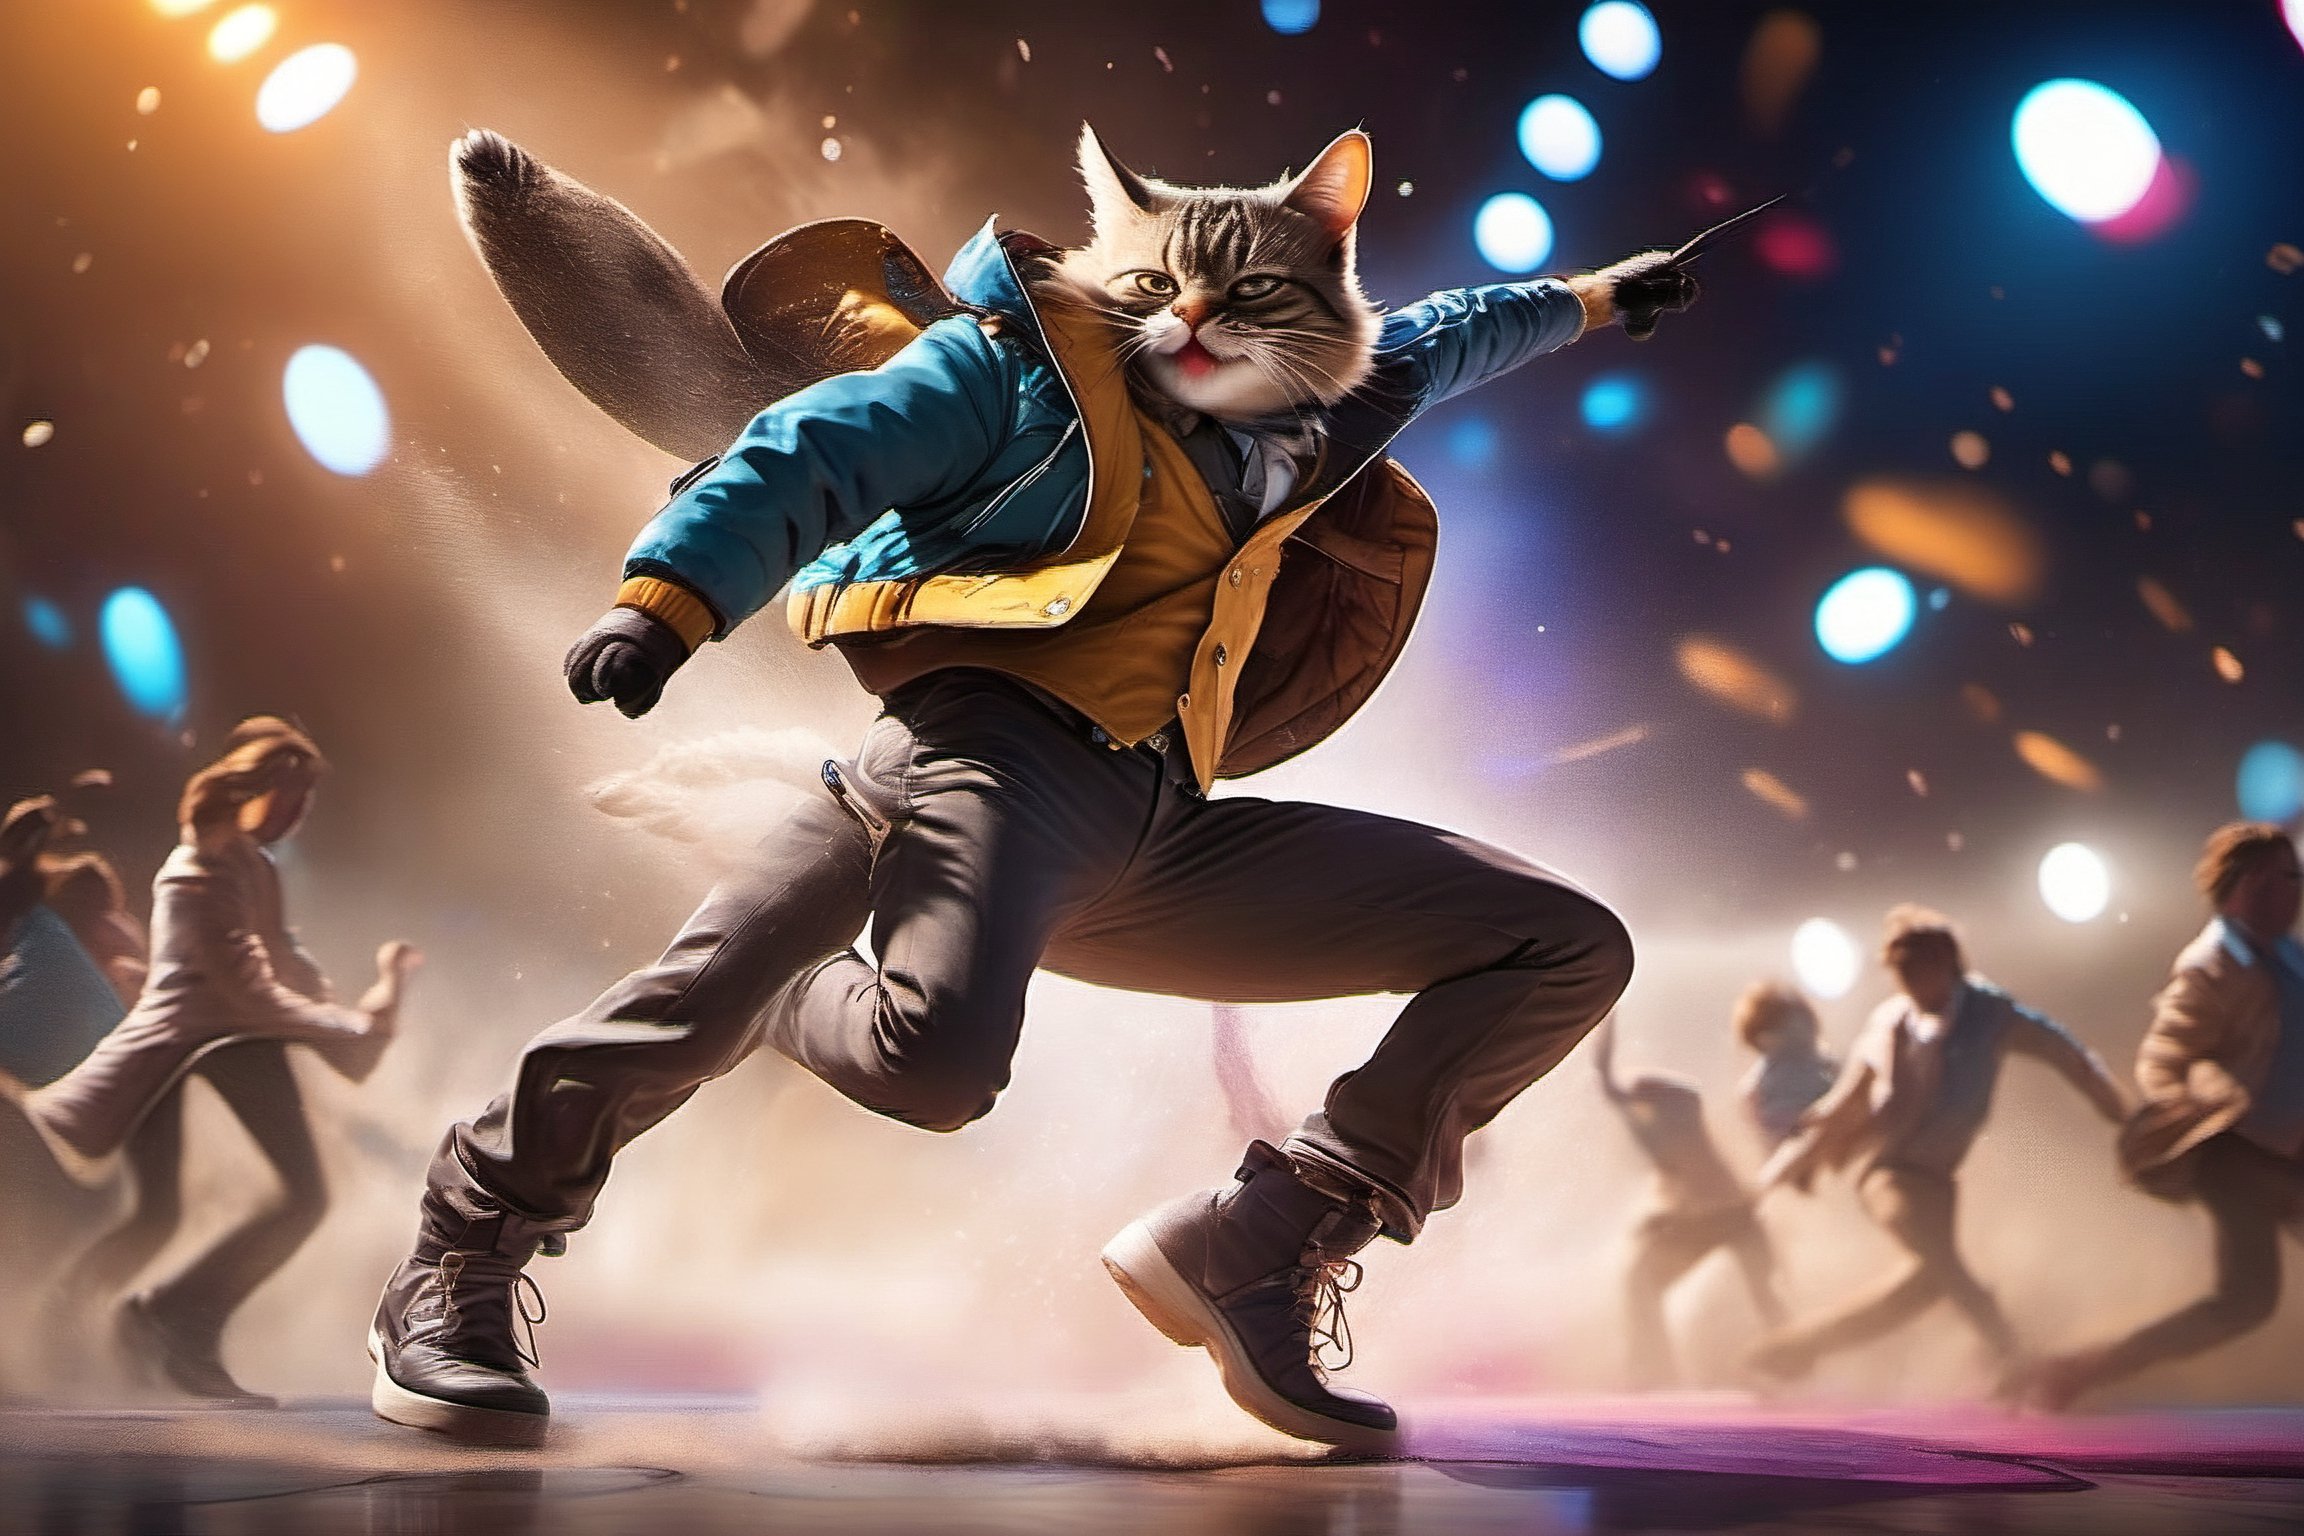 Real photo, a cool cat, wearing a jacket, singing with a guitar on his back, the background is the music stage, stage lighting, lighting atmosphere